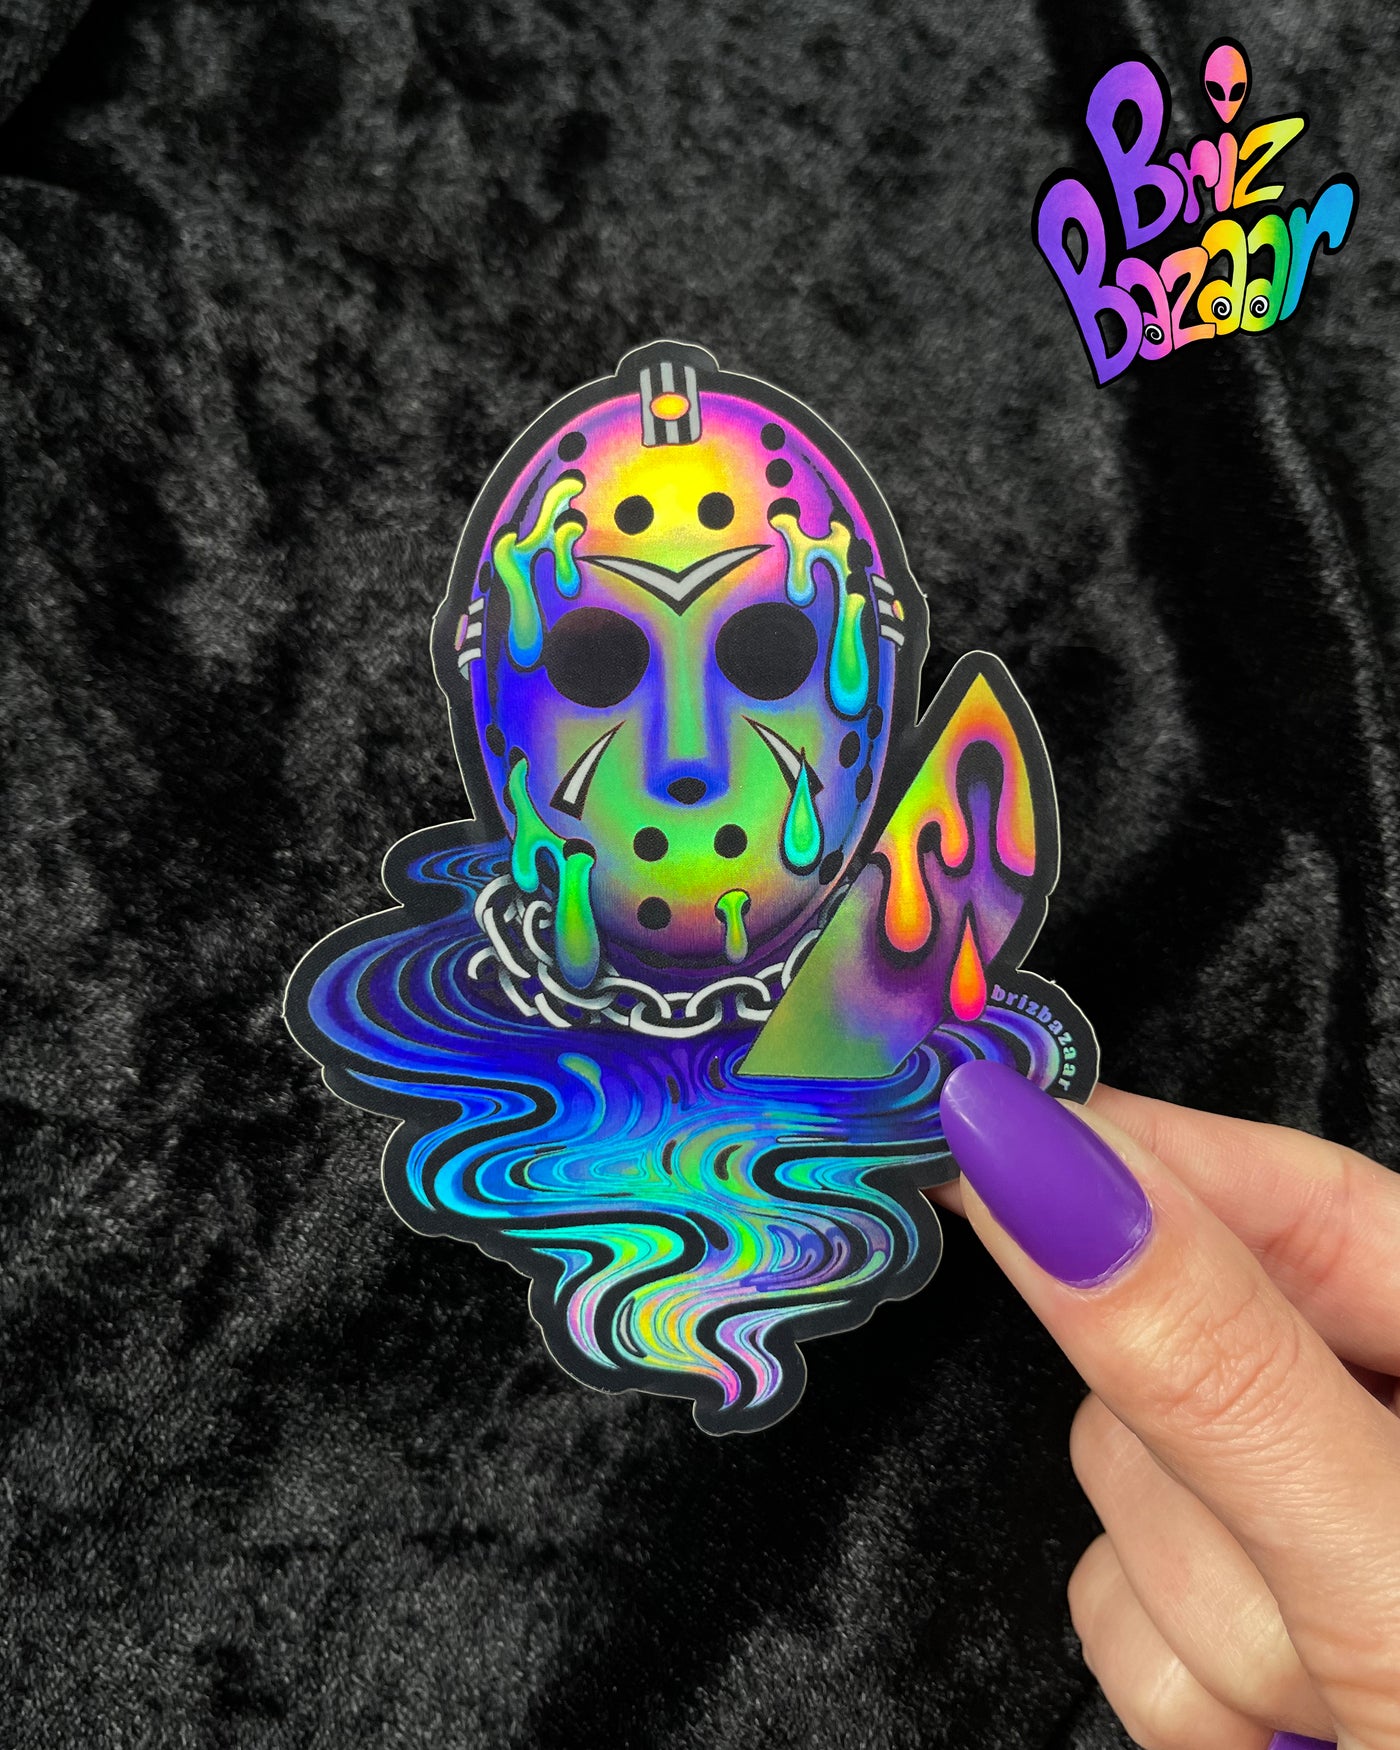 Holographic sticker of PSYDAY